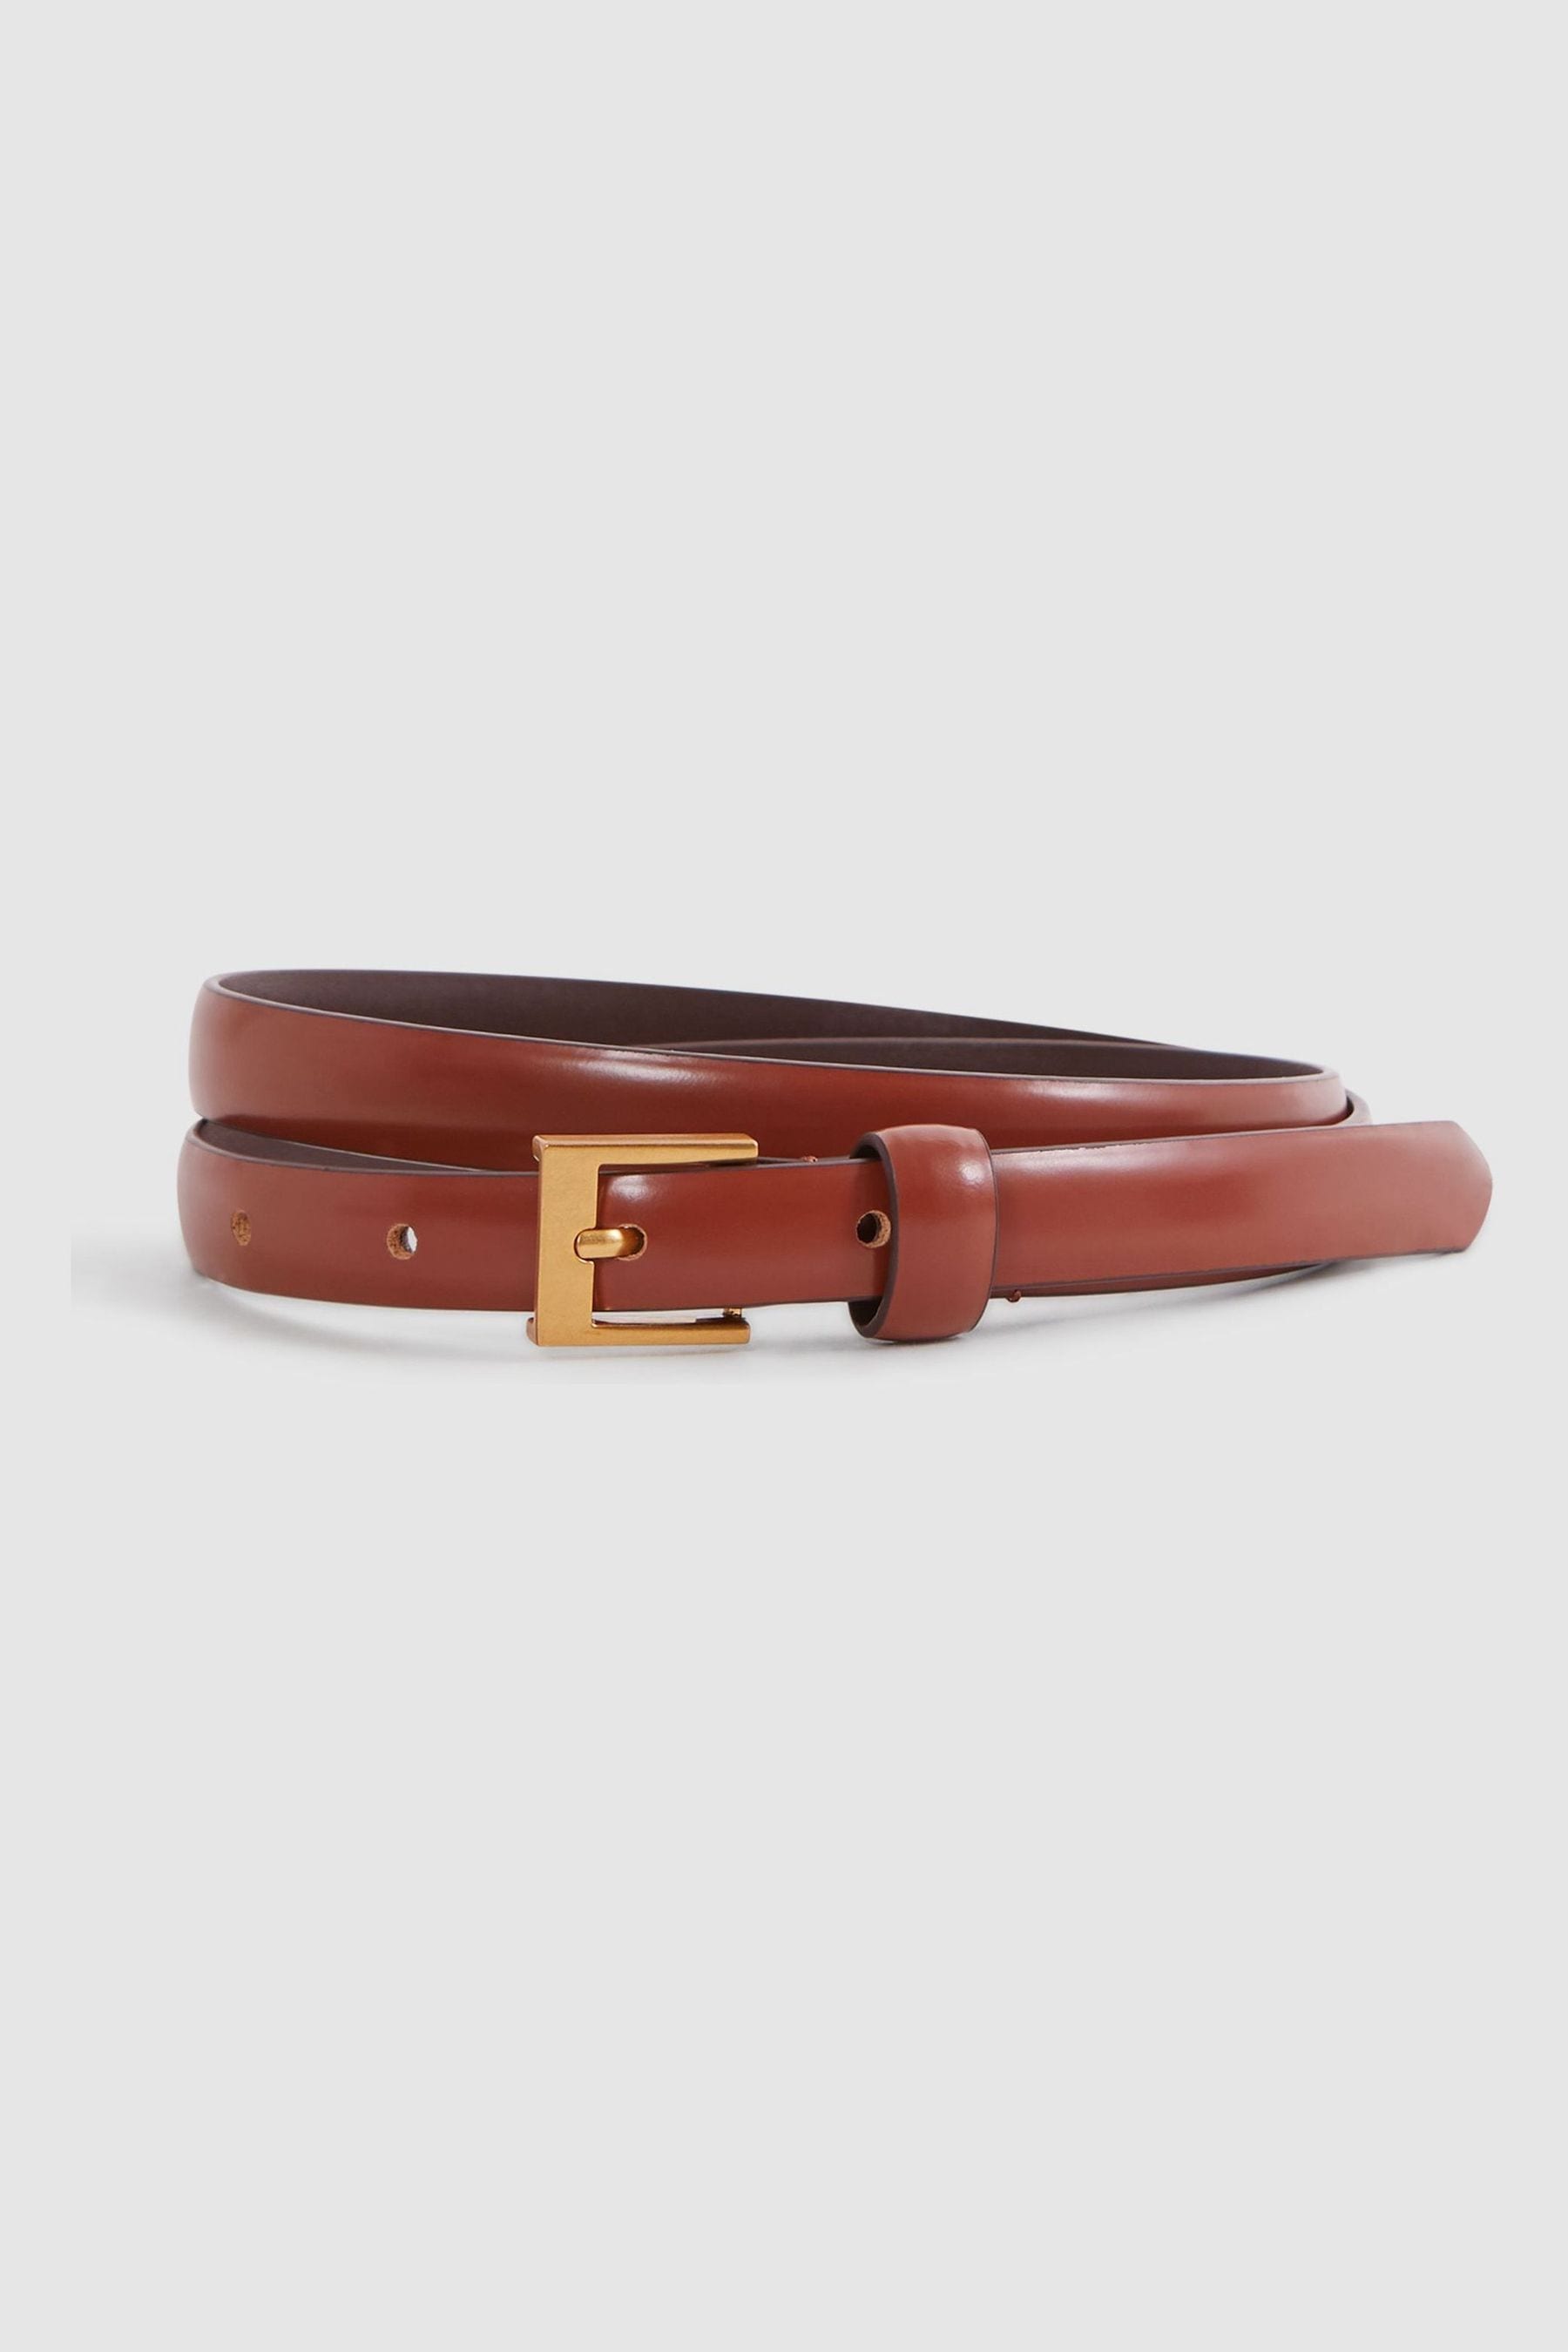 Reiss Holly - Tan Thin Leather Belt, S